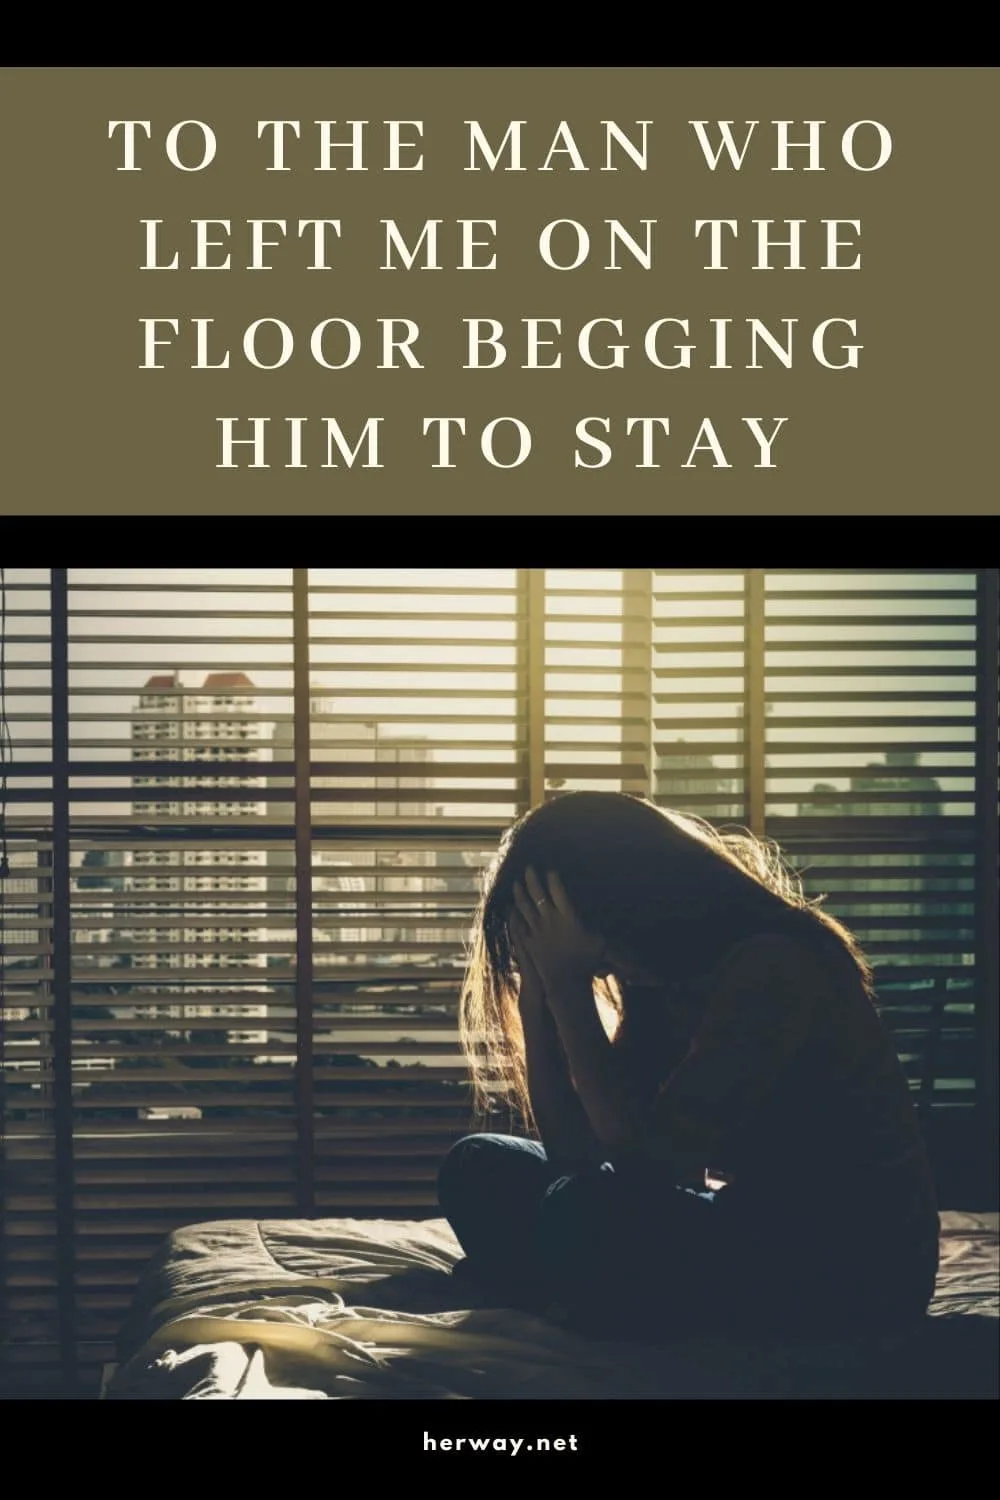 To The Man Who Left Me On The Floor Begging Him To Stay